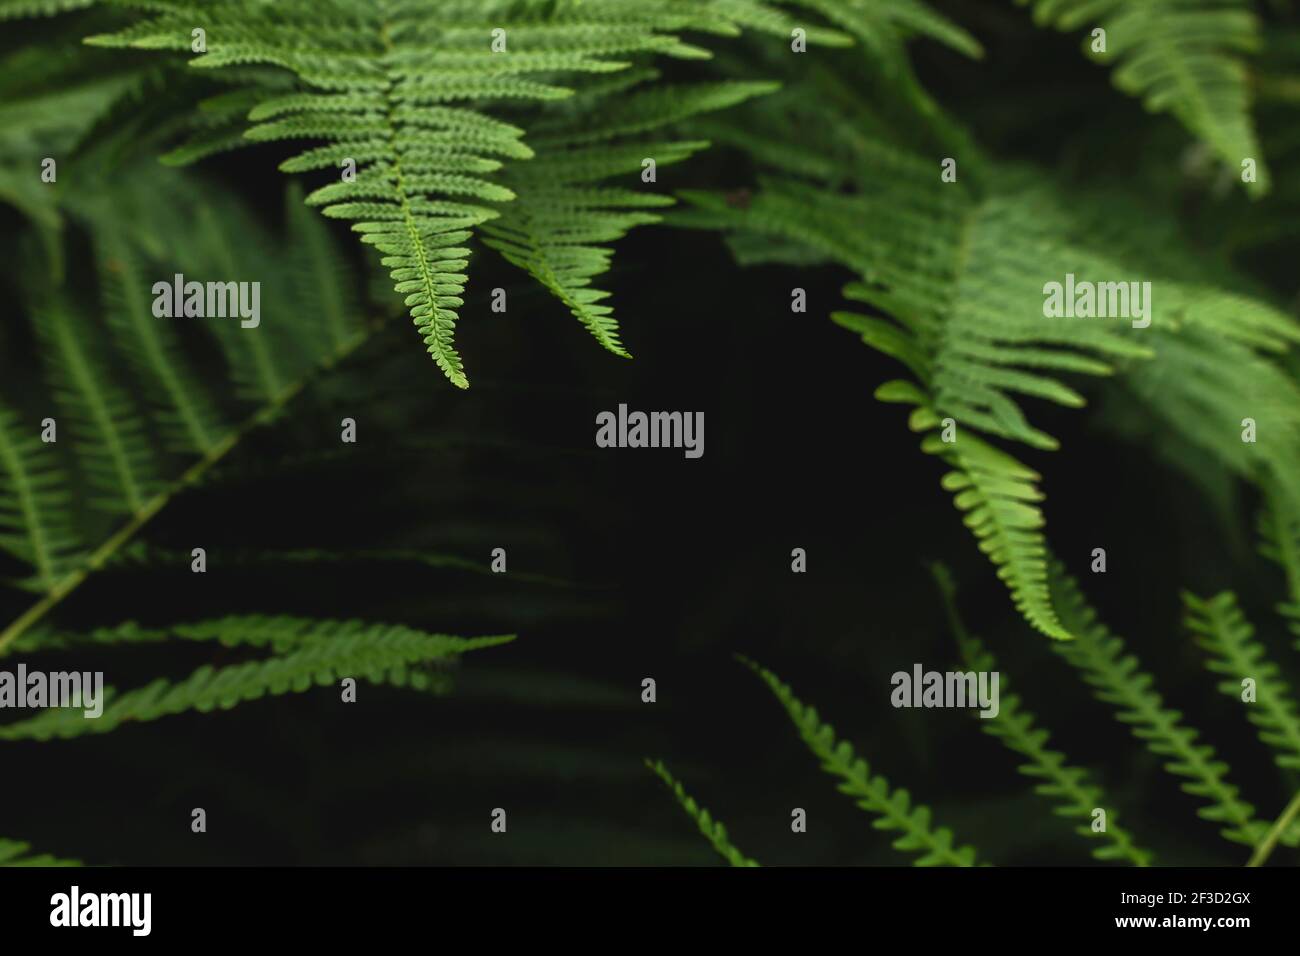 Lady fern green fronds, selective focus Stock Photo